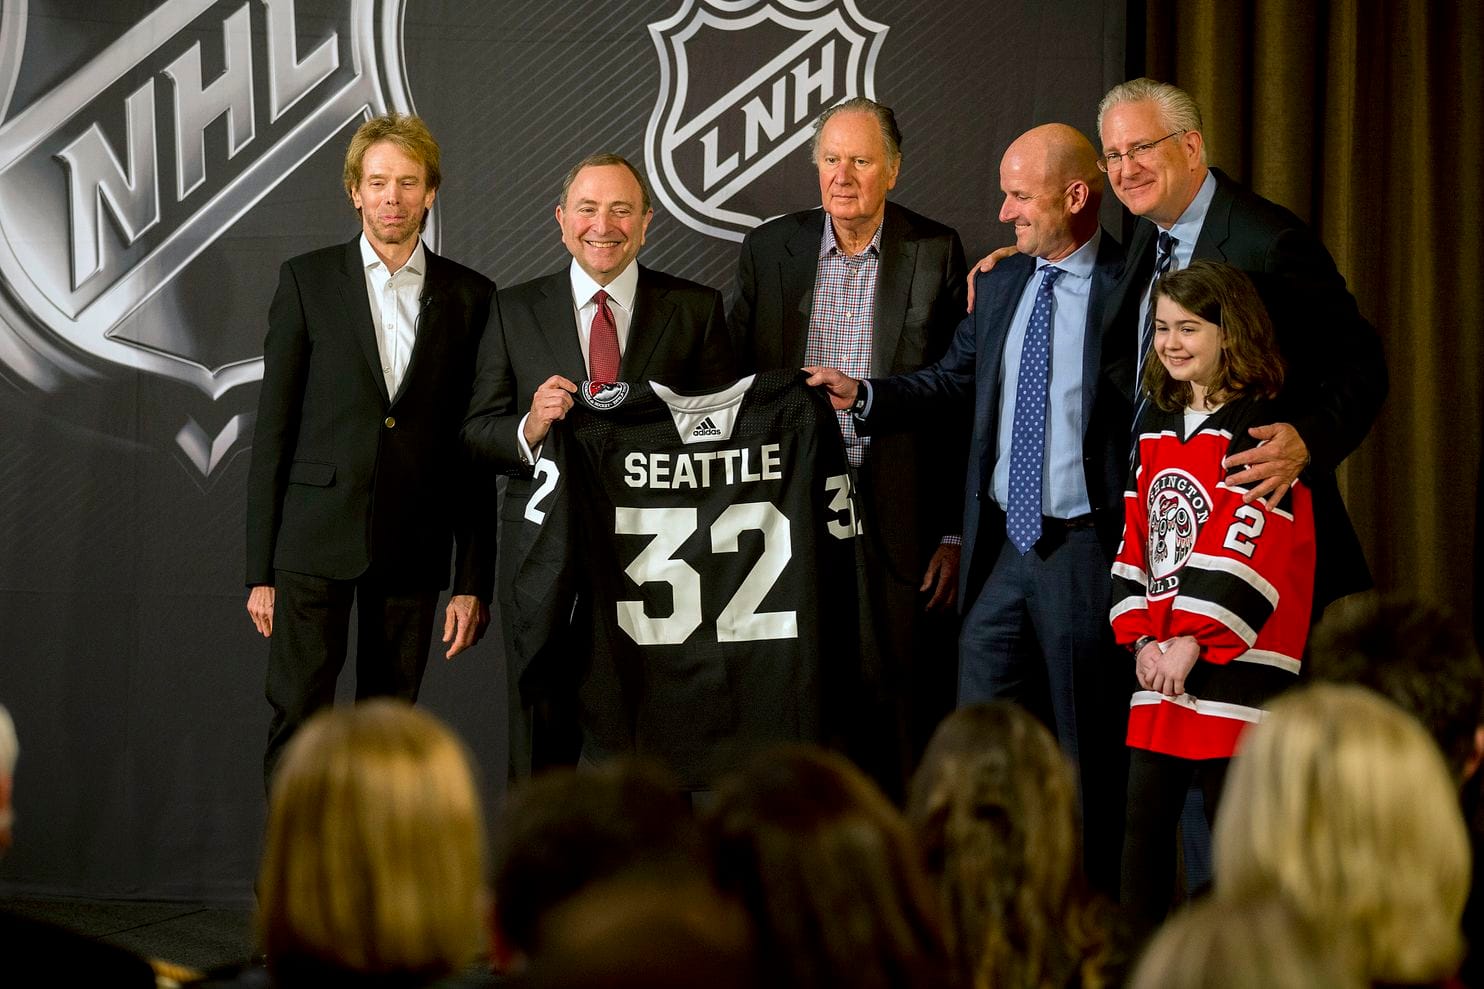 NHL Commissioner Gary Bettman with officials from the new Seattle hockey group.